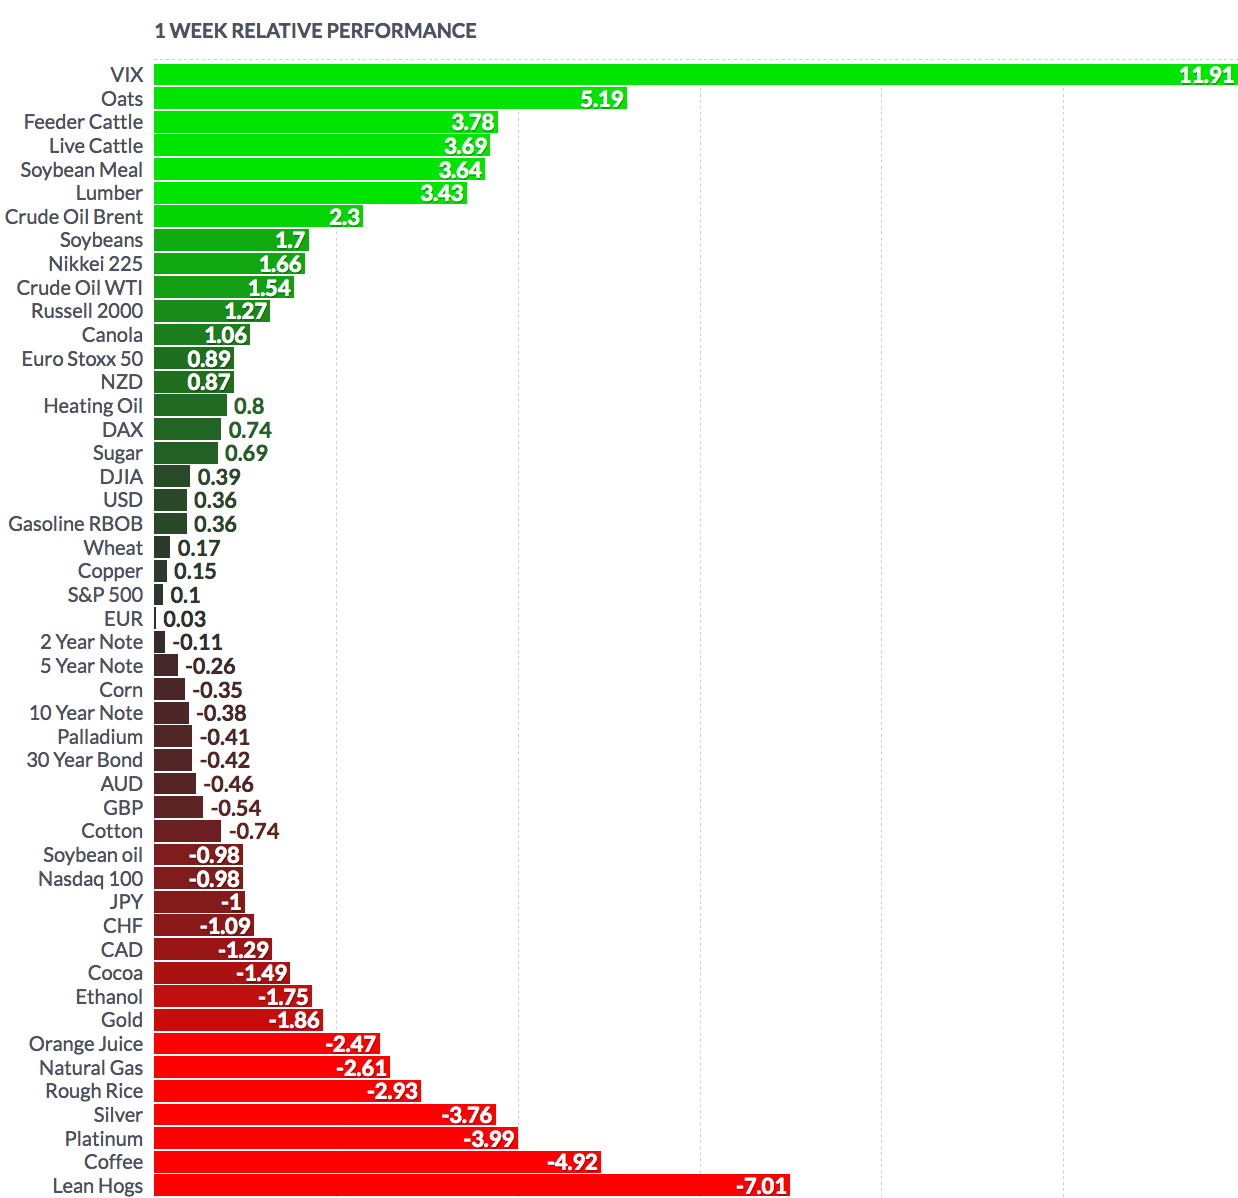 1 Week Relative Performance All Assets